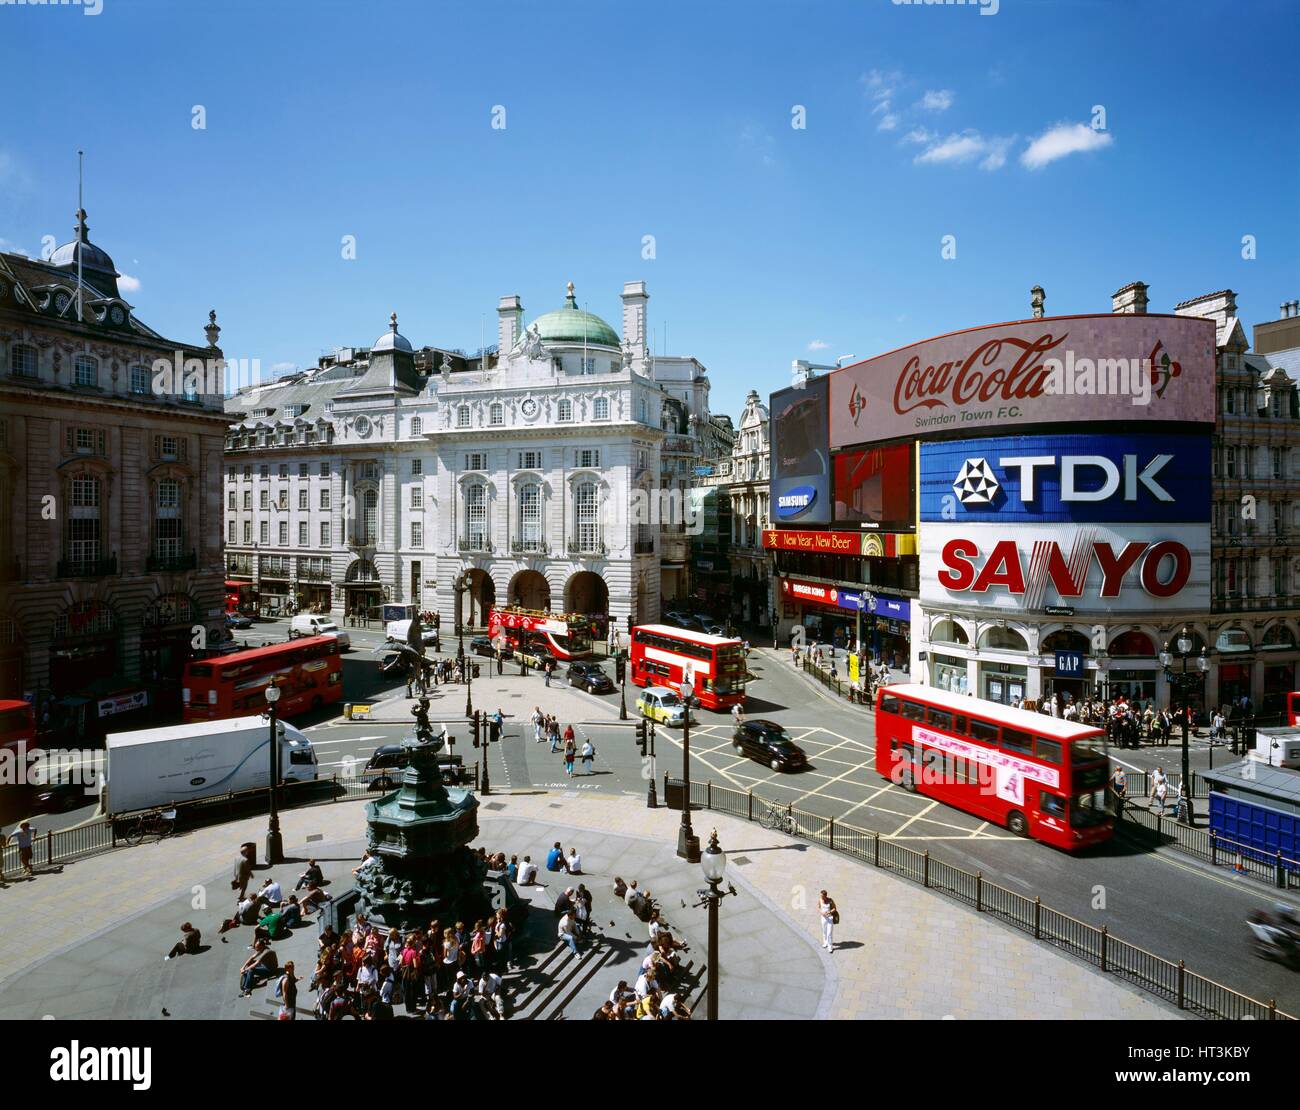 Piccadilly Circus, c1990-2010. Artiste : Max Alexander. Banque D'Images